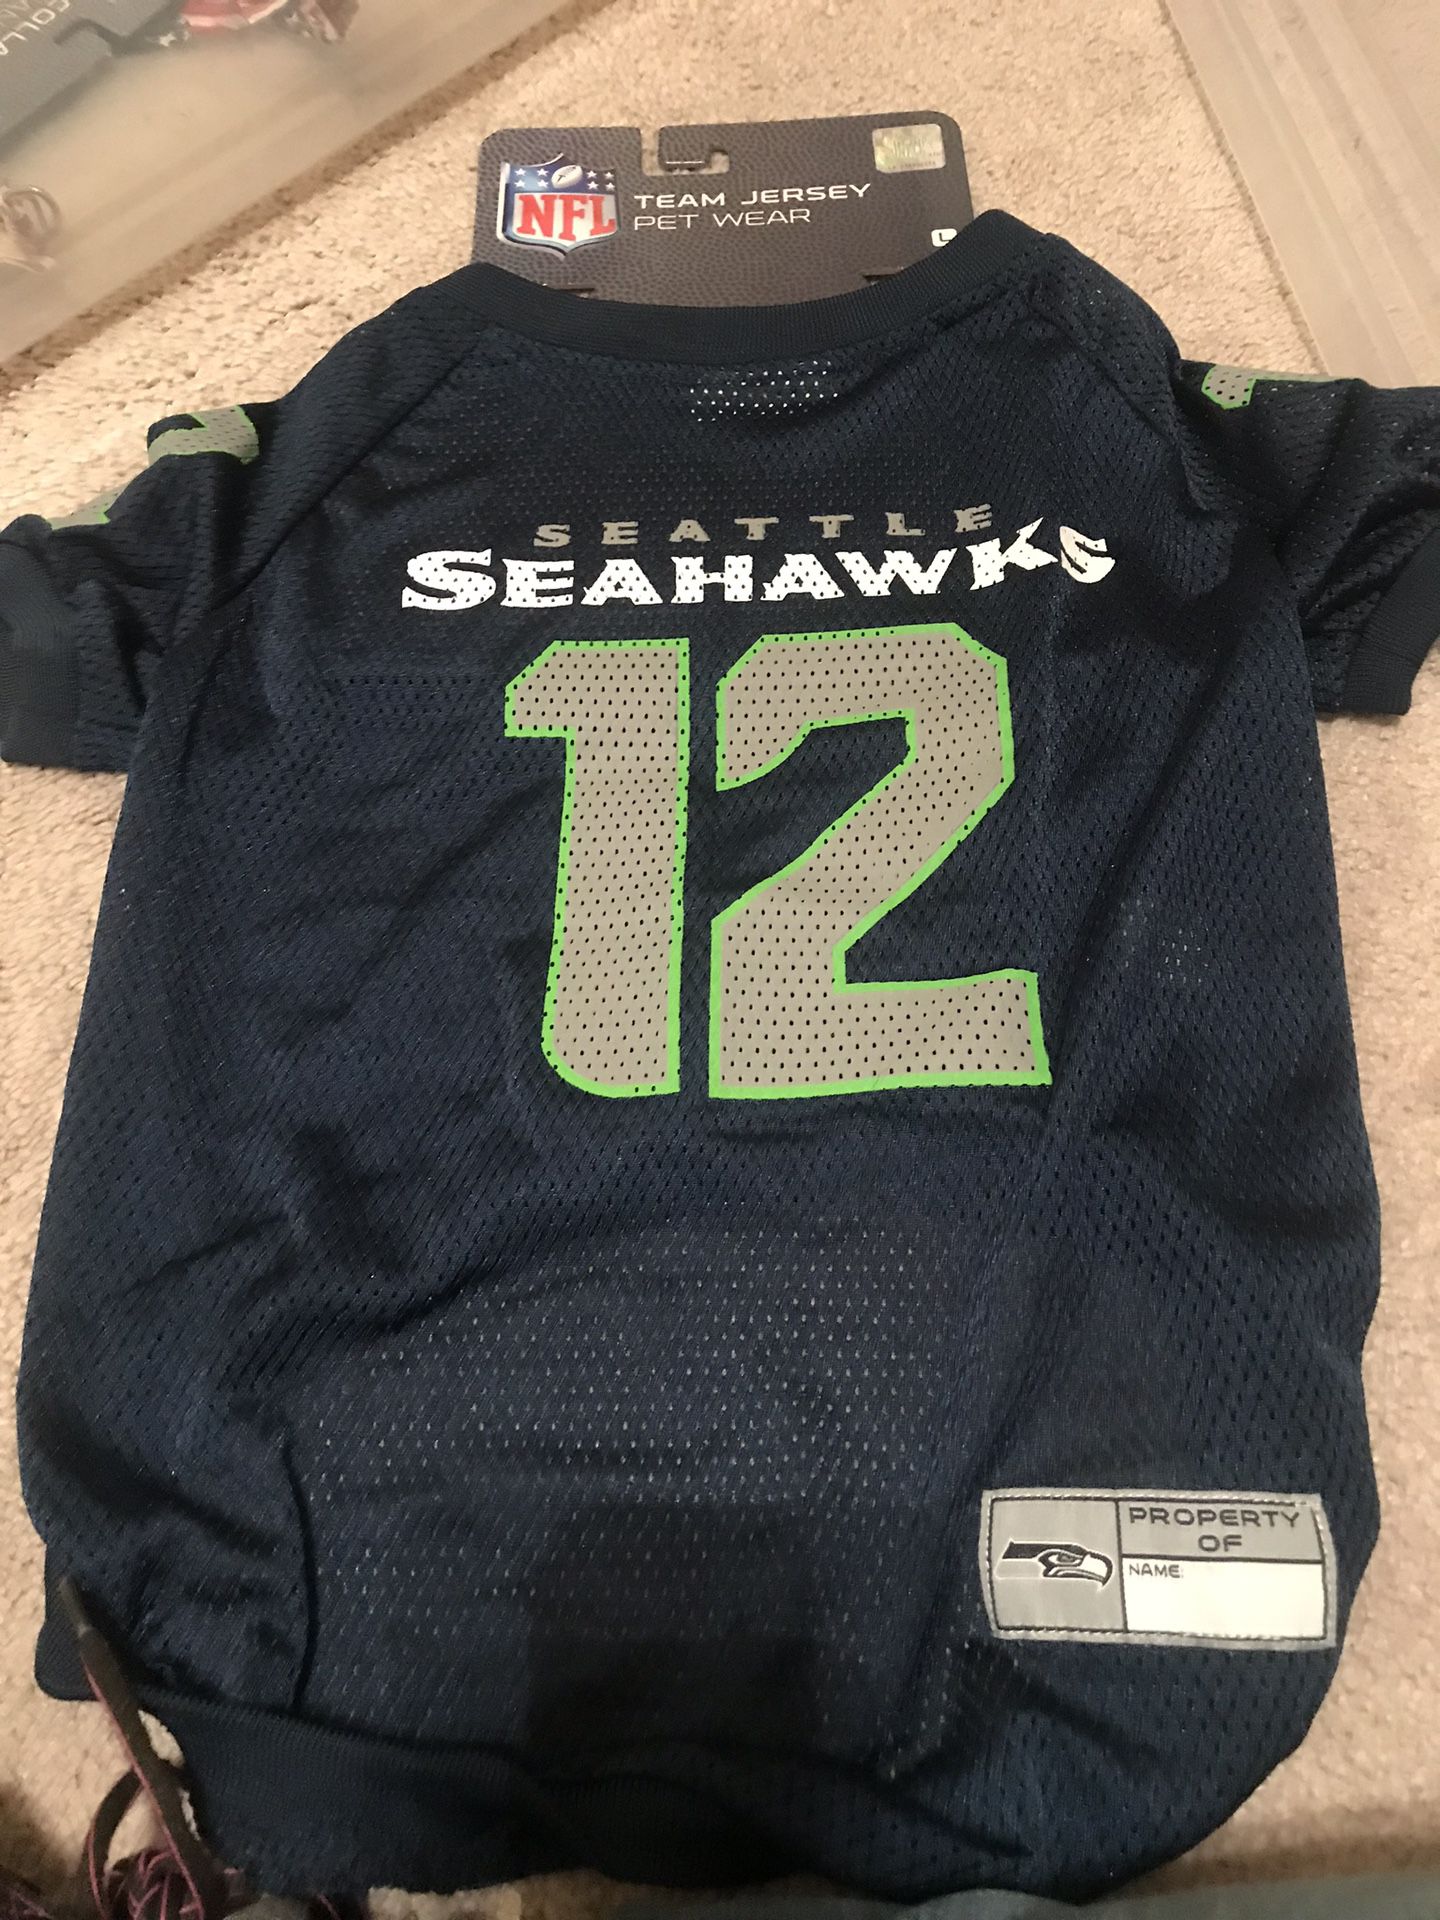 New Pet Jersey NFL Licensed Seahawks